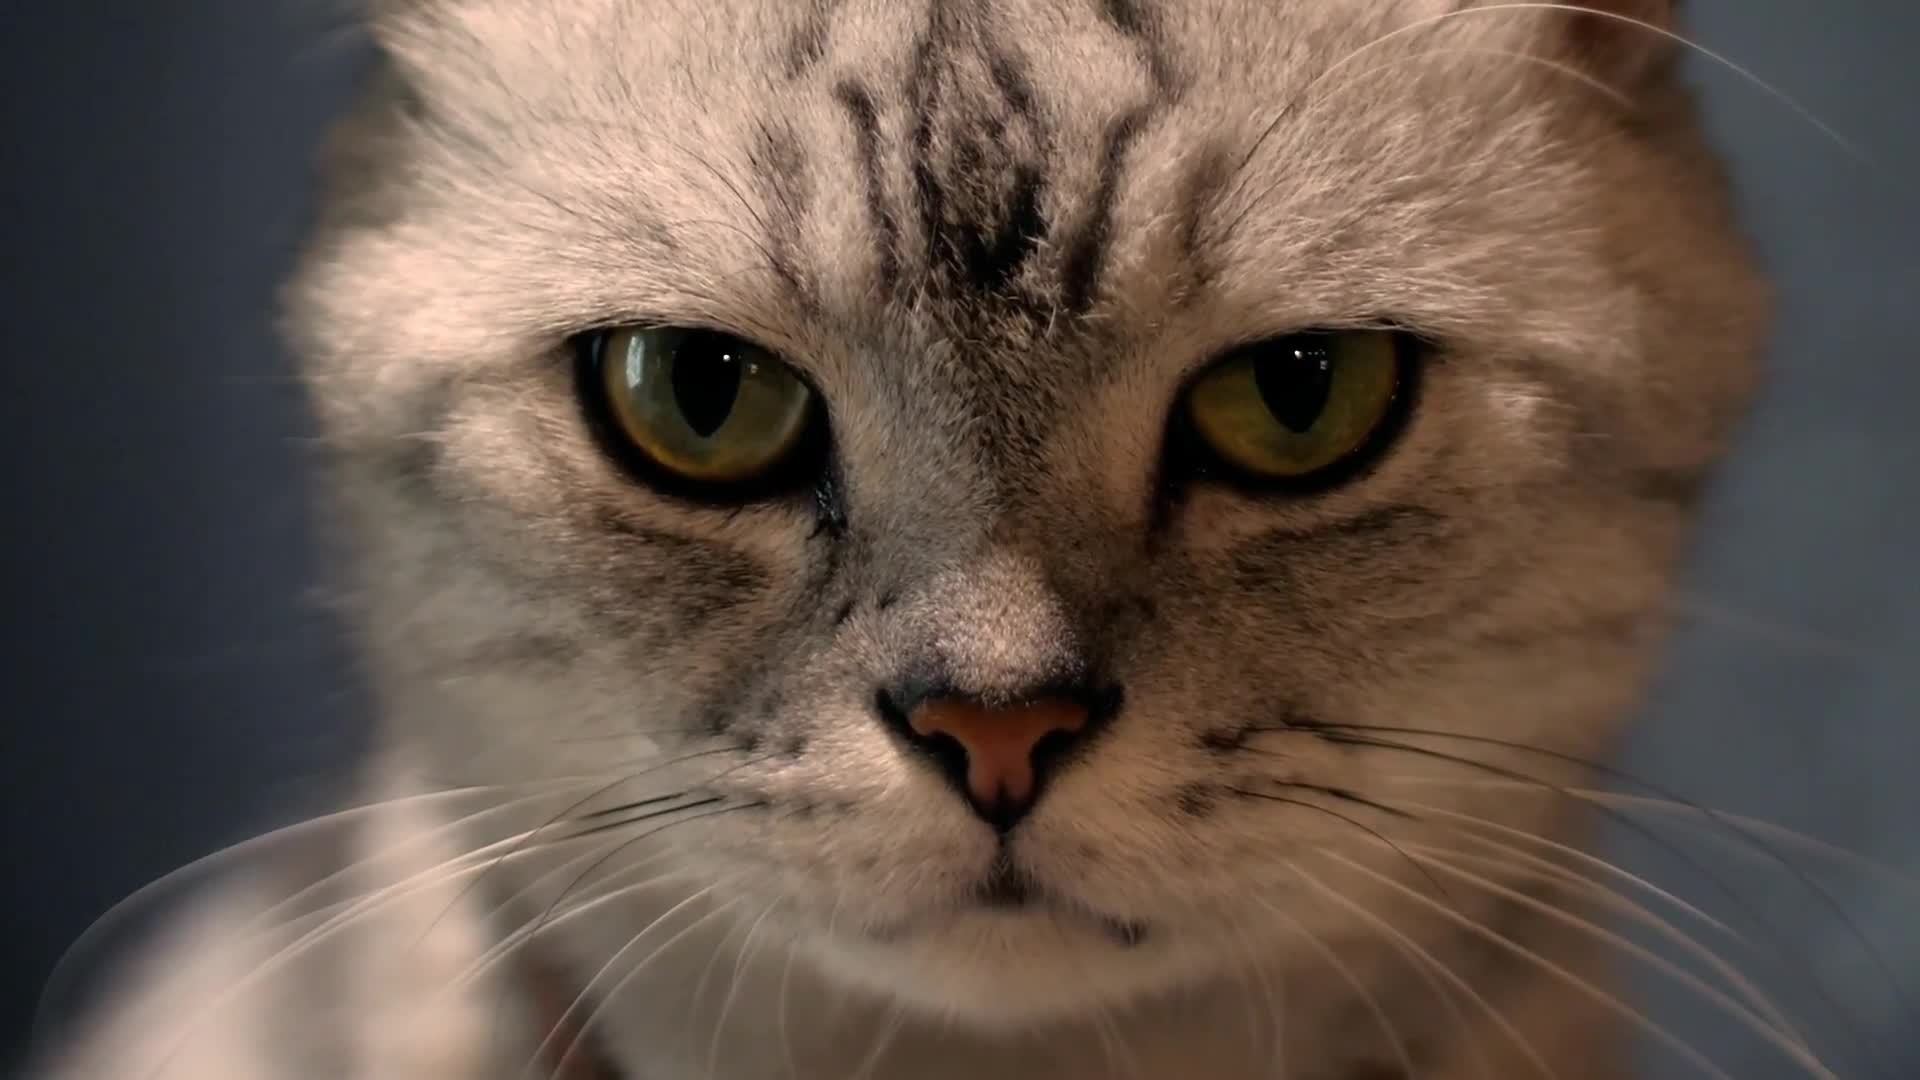 Watch Scientist Explains Why Some Cats Eat Human Corpses | Currents | WIRED